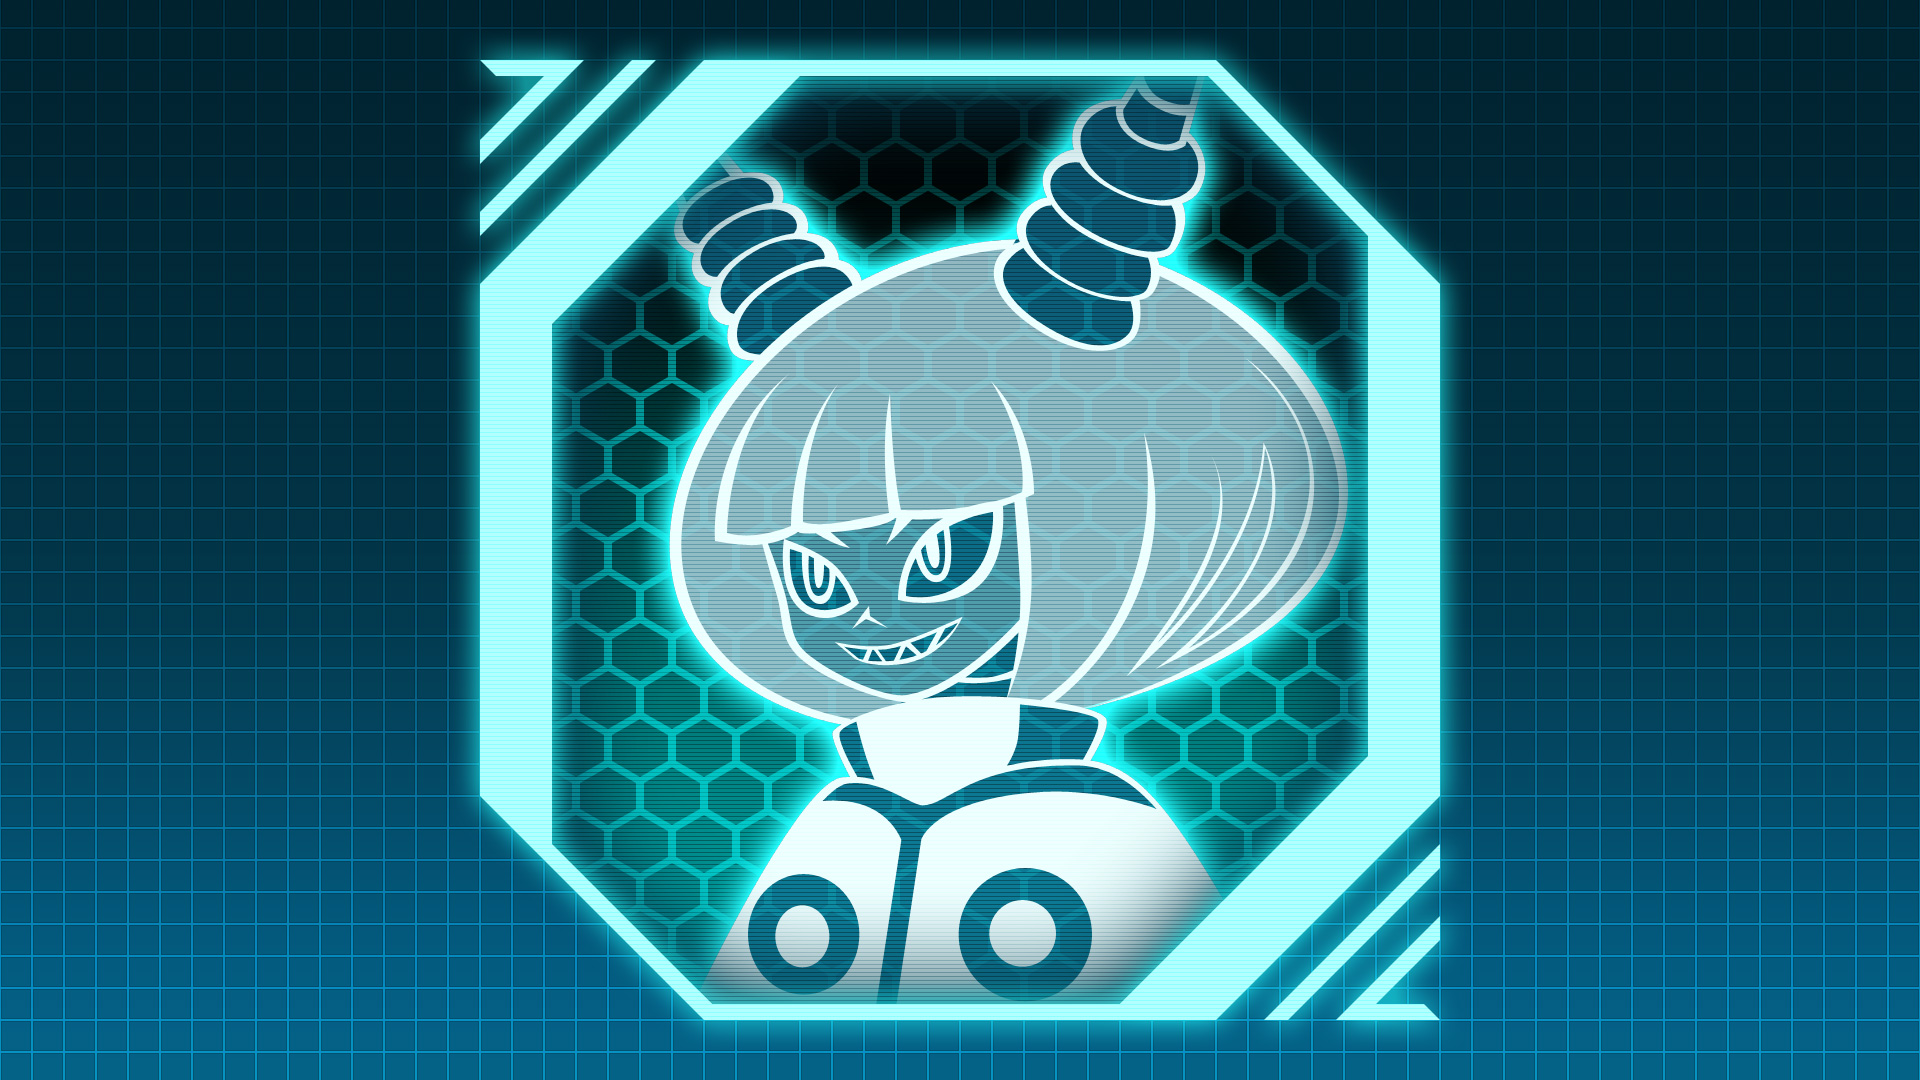 Icon for FINE PLAY! (Mighty No. 3)